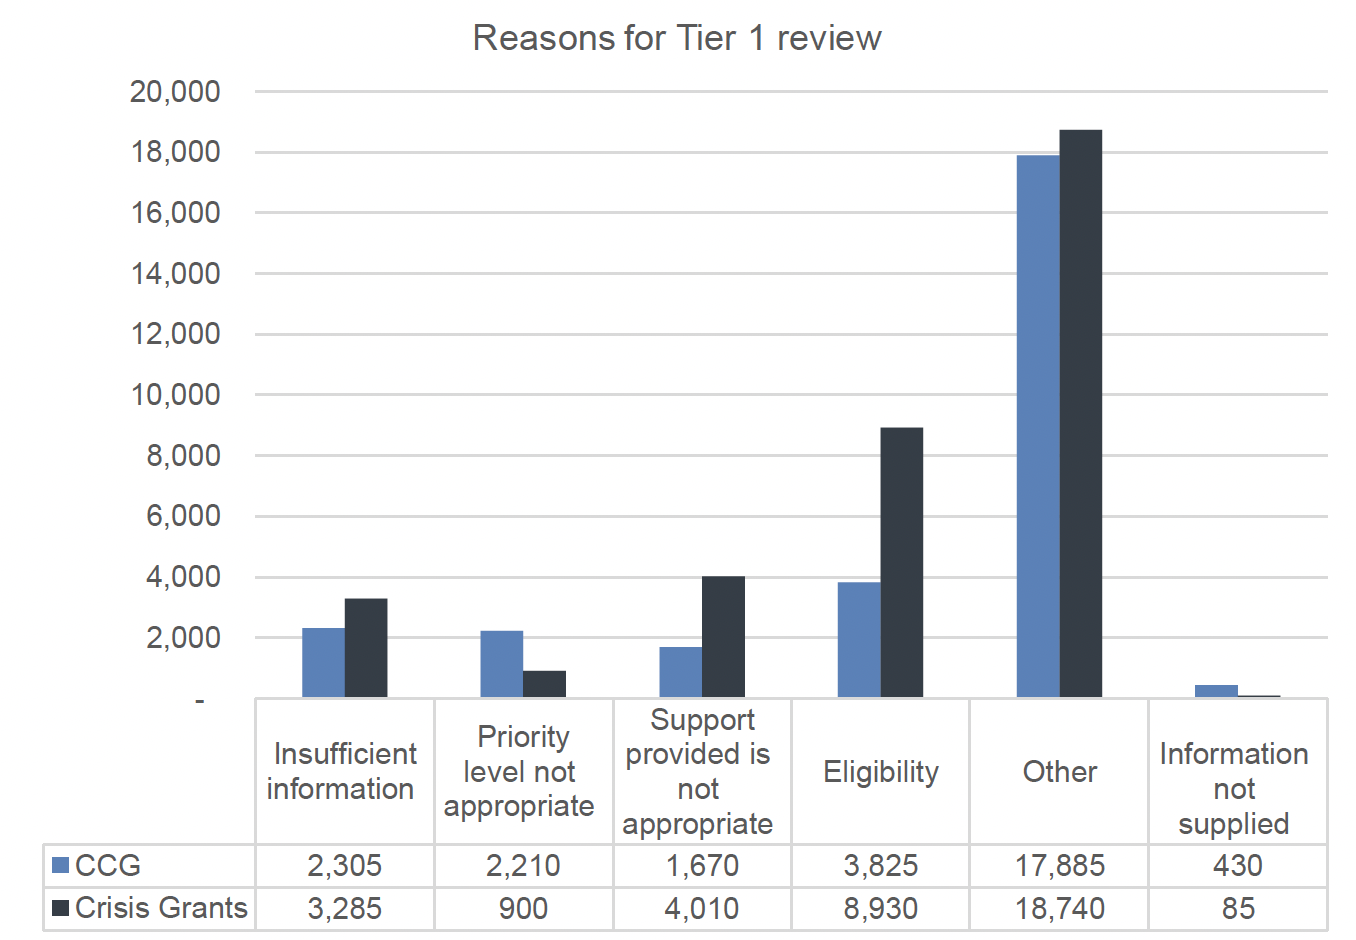 This figure shows total number of Tier 1 reviews by reason for CCG and CG. The main trends are described in the text. 